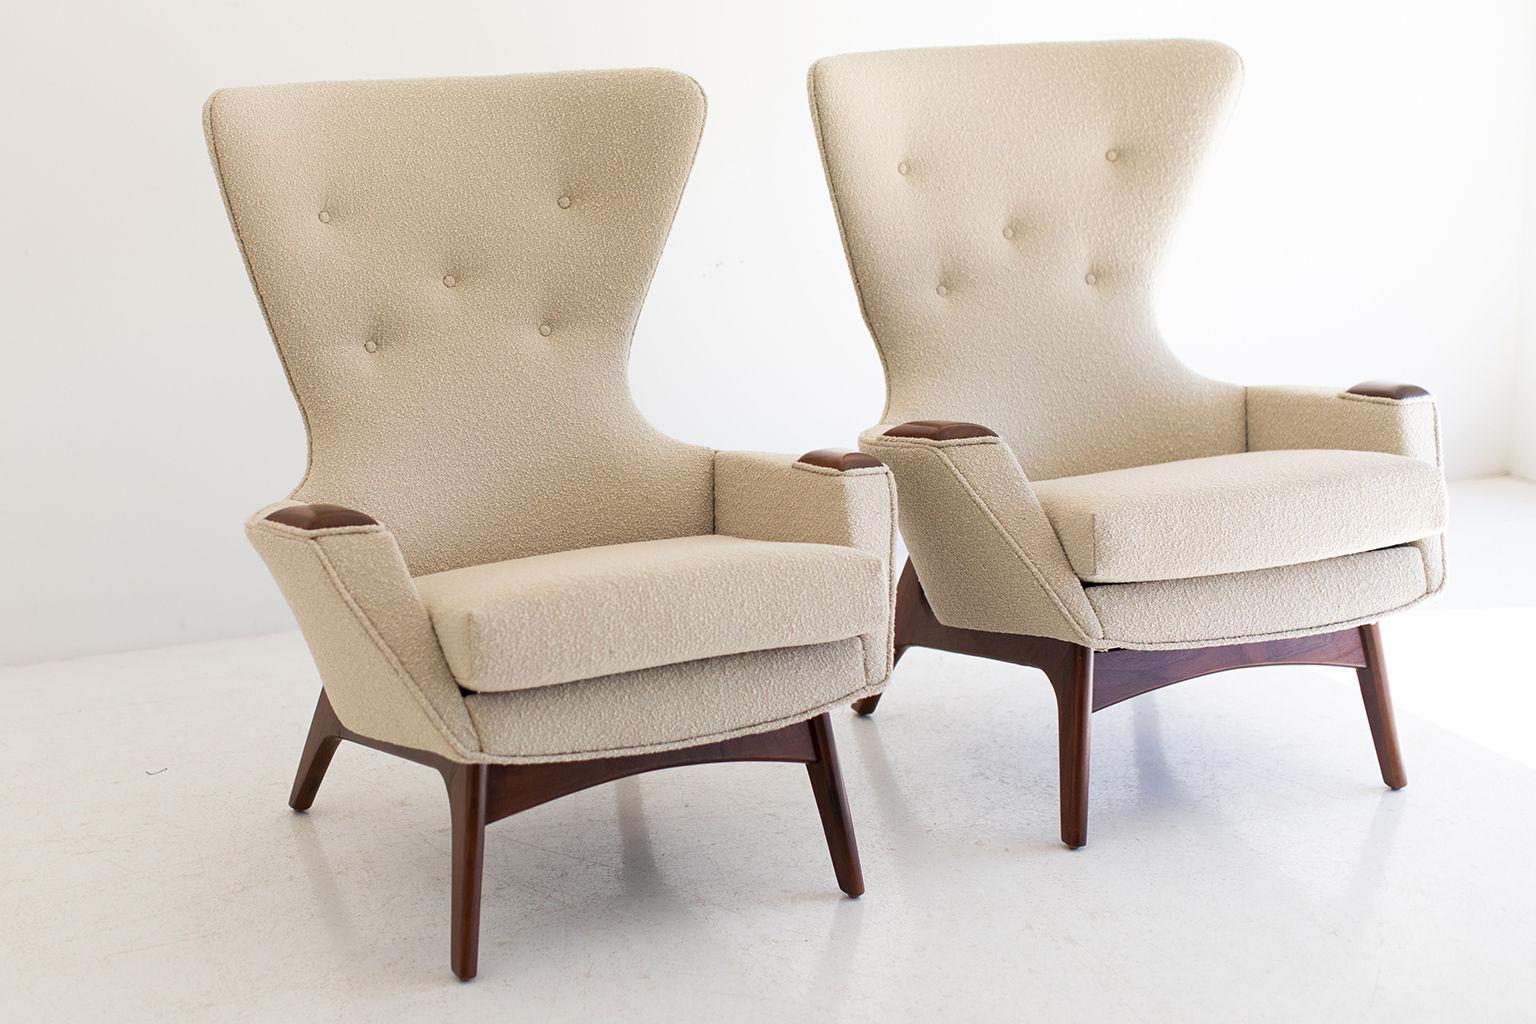 Mid-Century Modern Adrian Pearsall Lounge Chairs for Craft Associates Inc